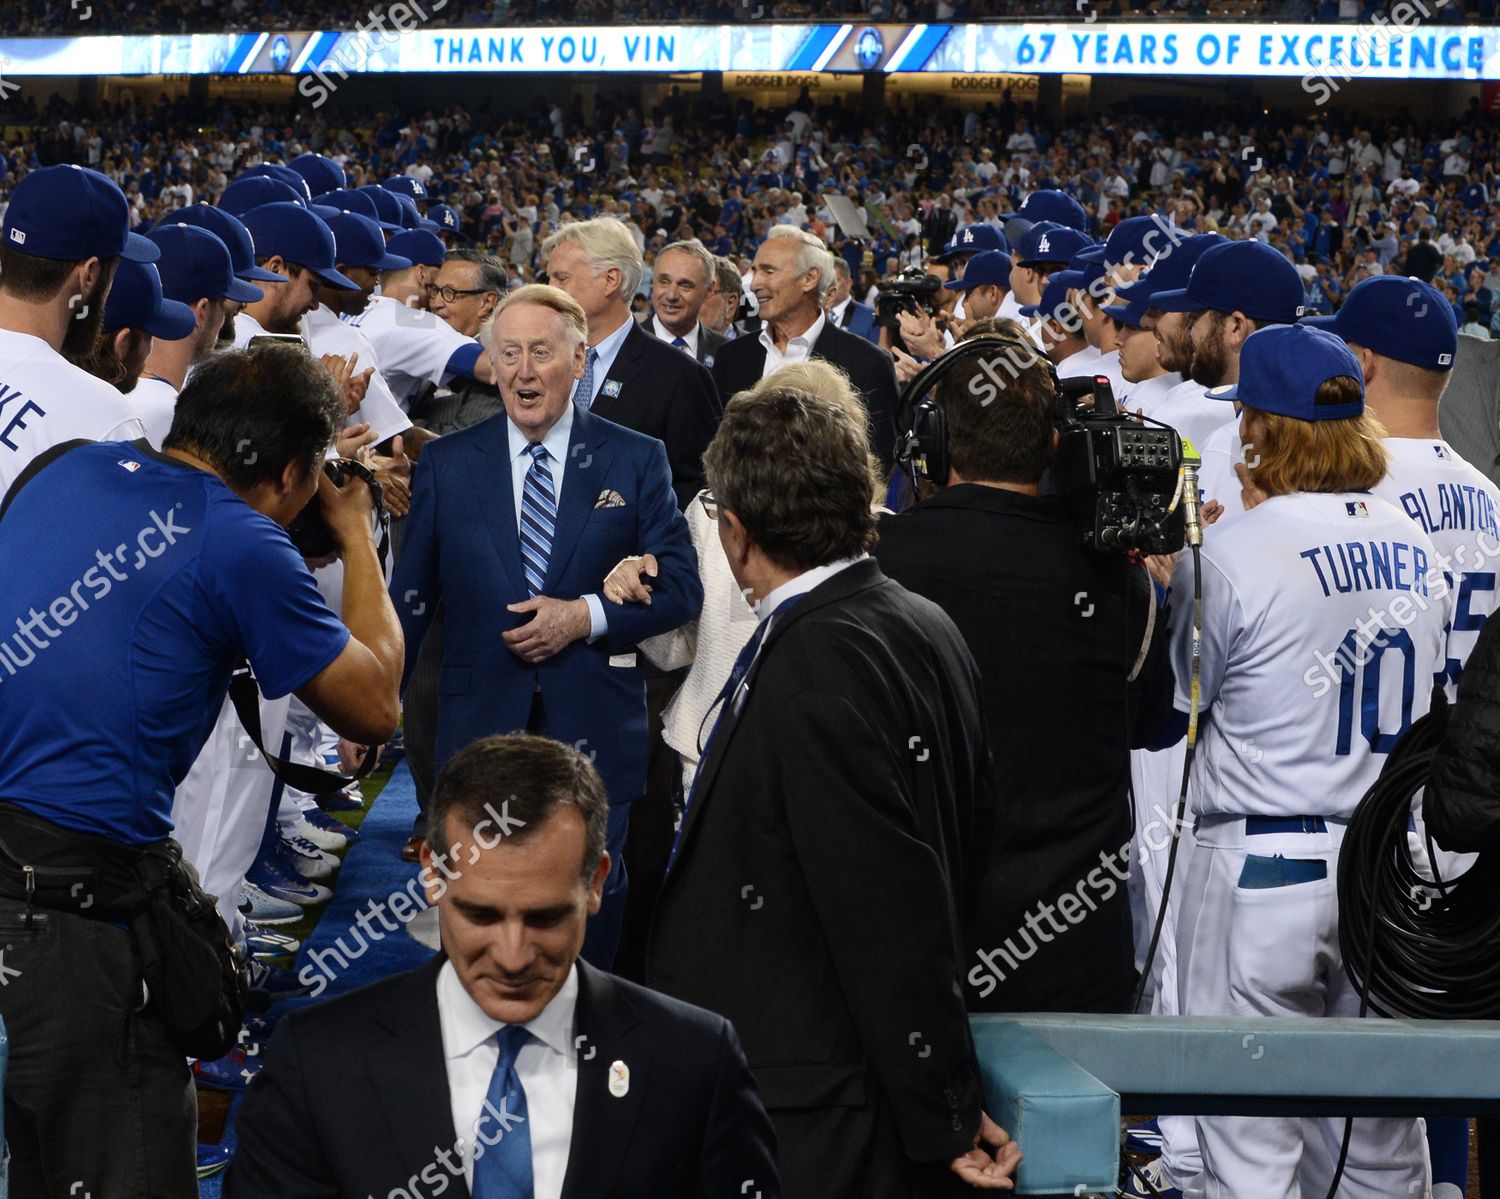 Los Angeles Dodgers thank you Vin Scully 67 years of excellence